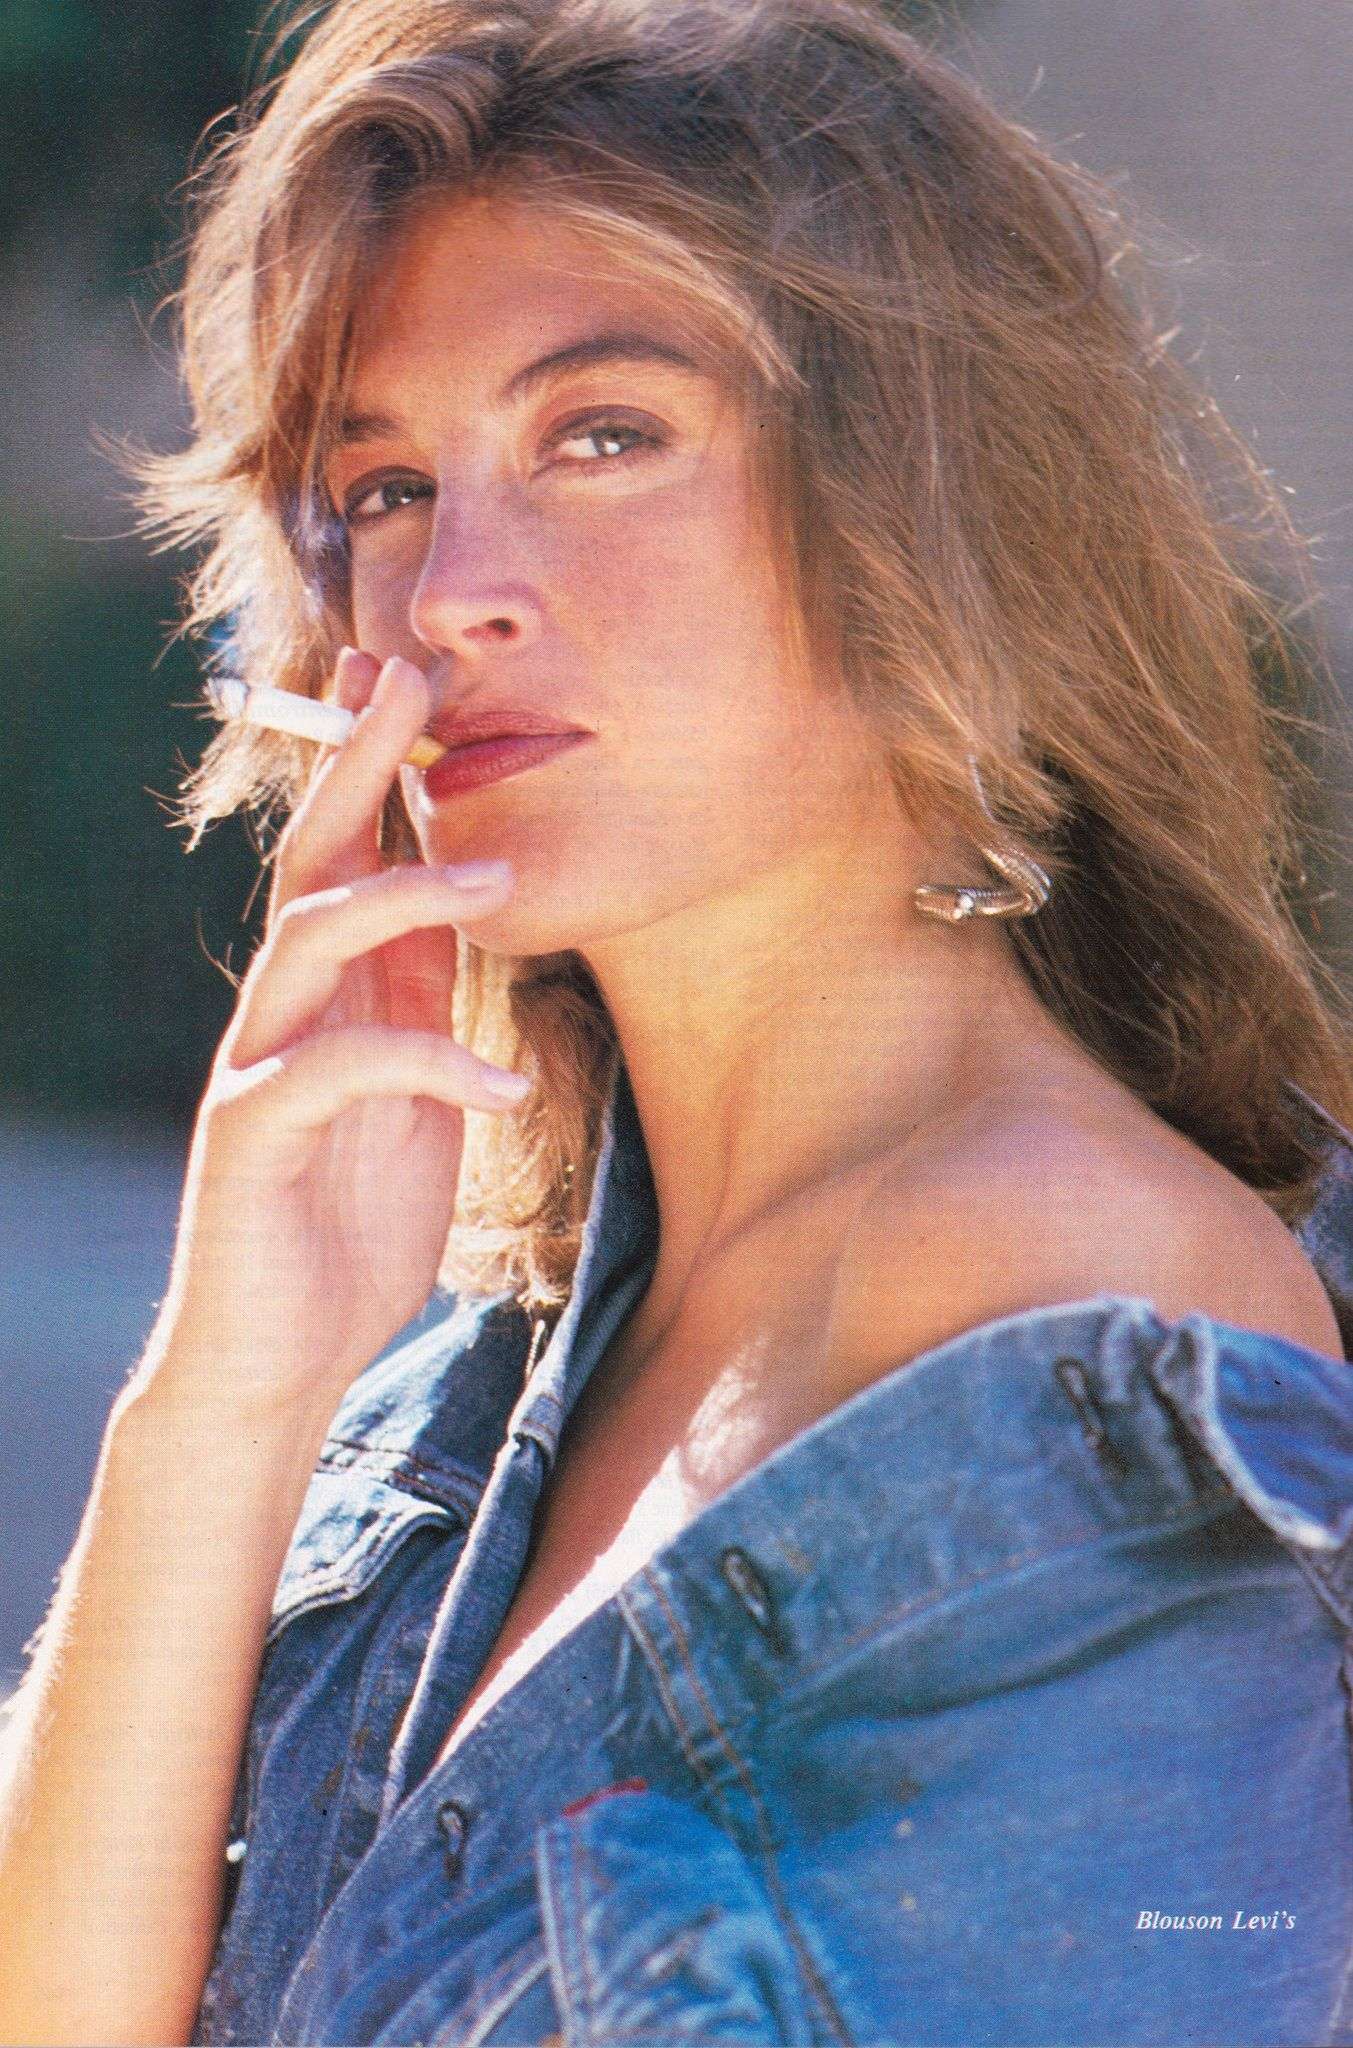 51 Hot Pictures Of Amanda Pays Demonstrate That She Is As Hot As Anyone Might Imagine | Best Of Comic Books